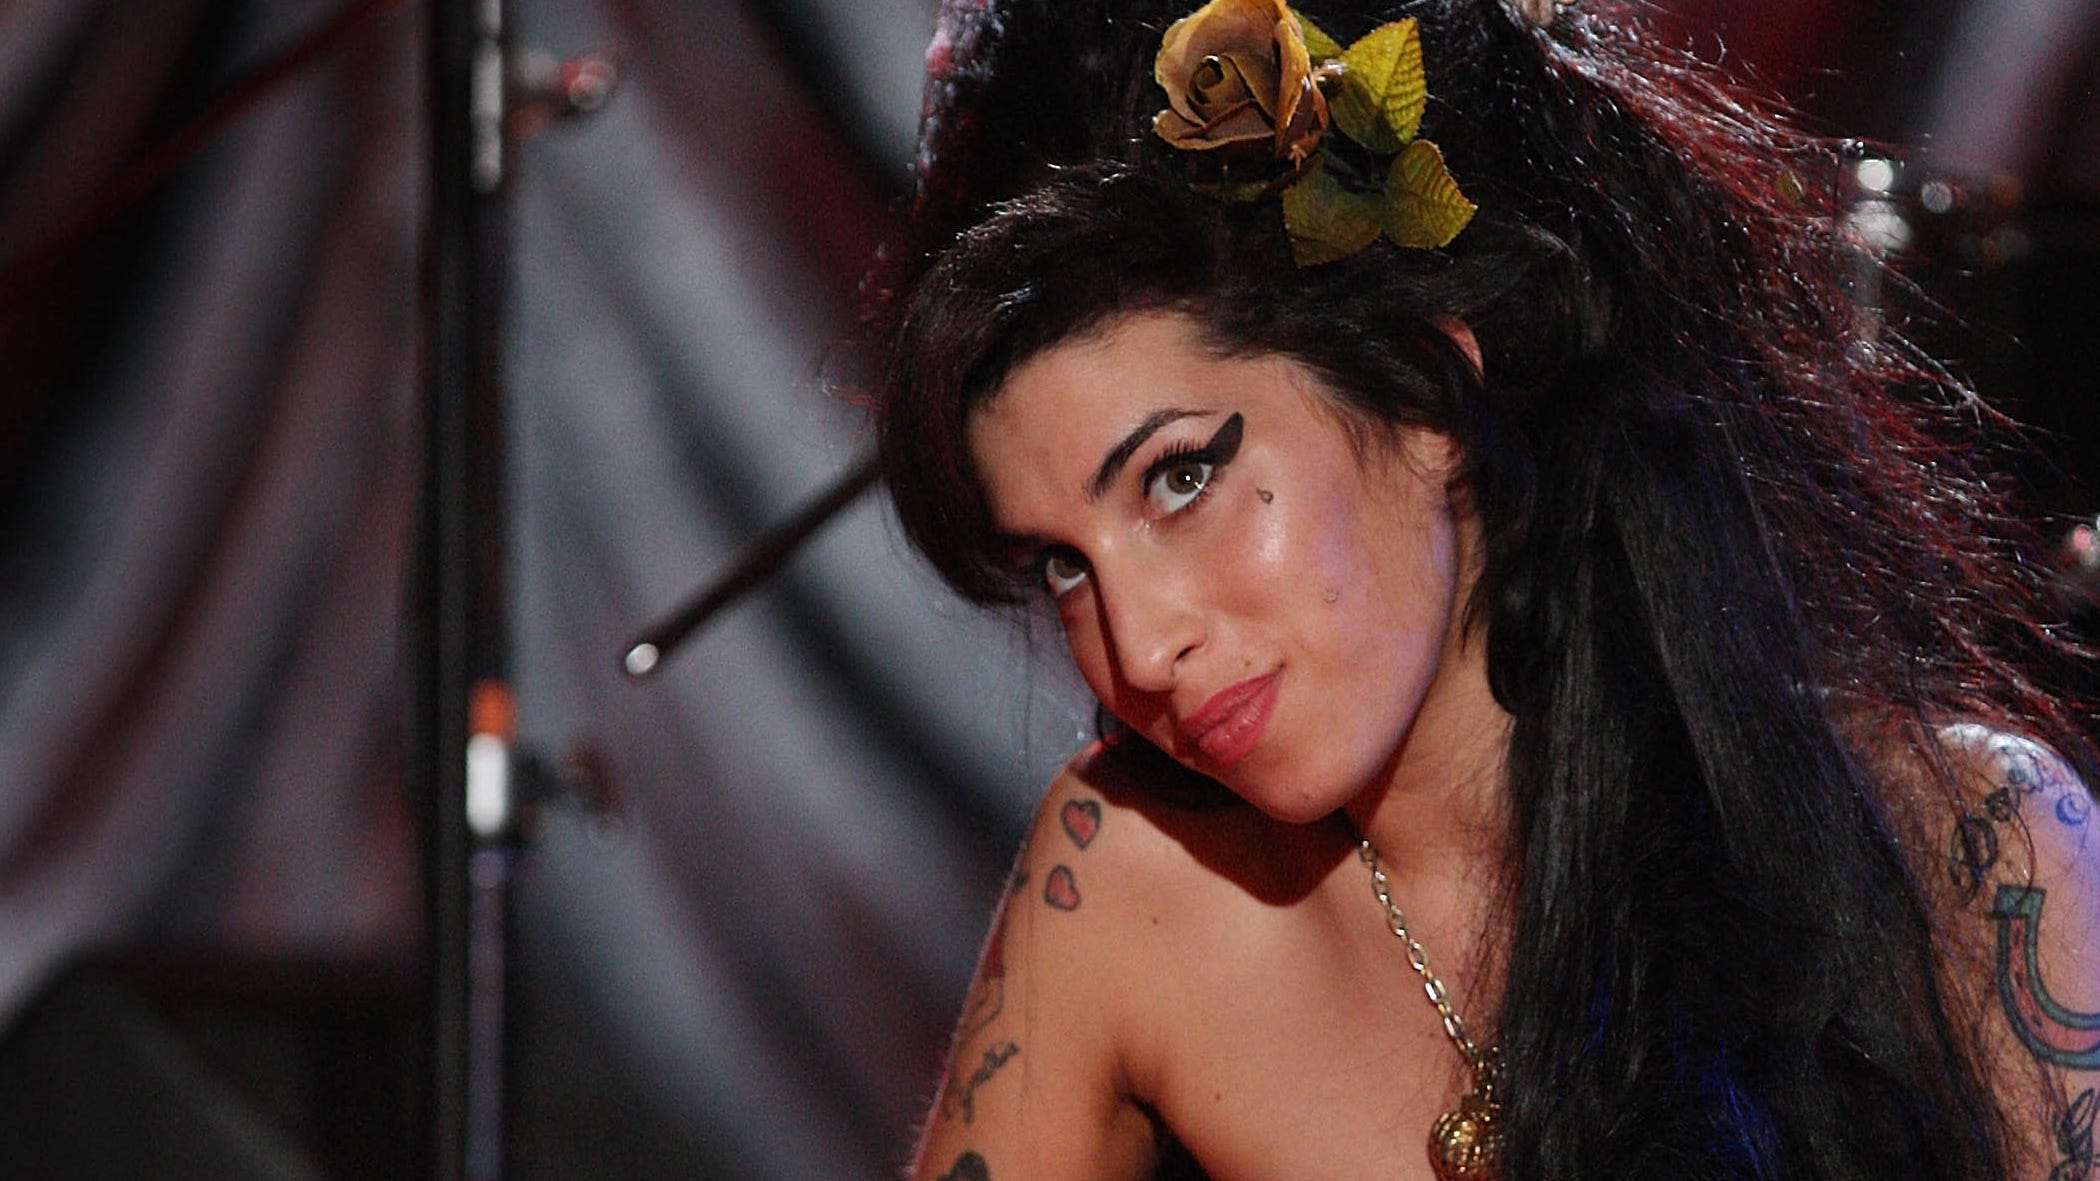 'Back to Black' follows Amy Winehouse through career highs and infamous heartbreak